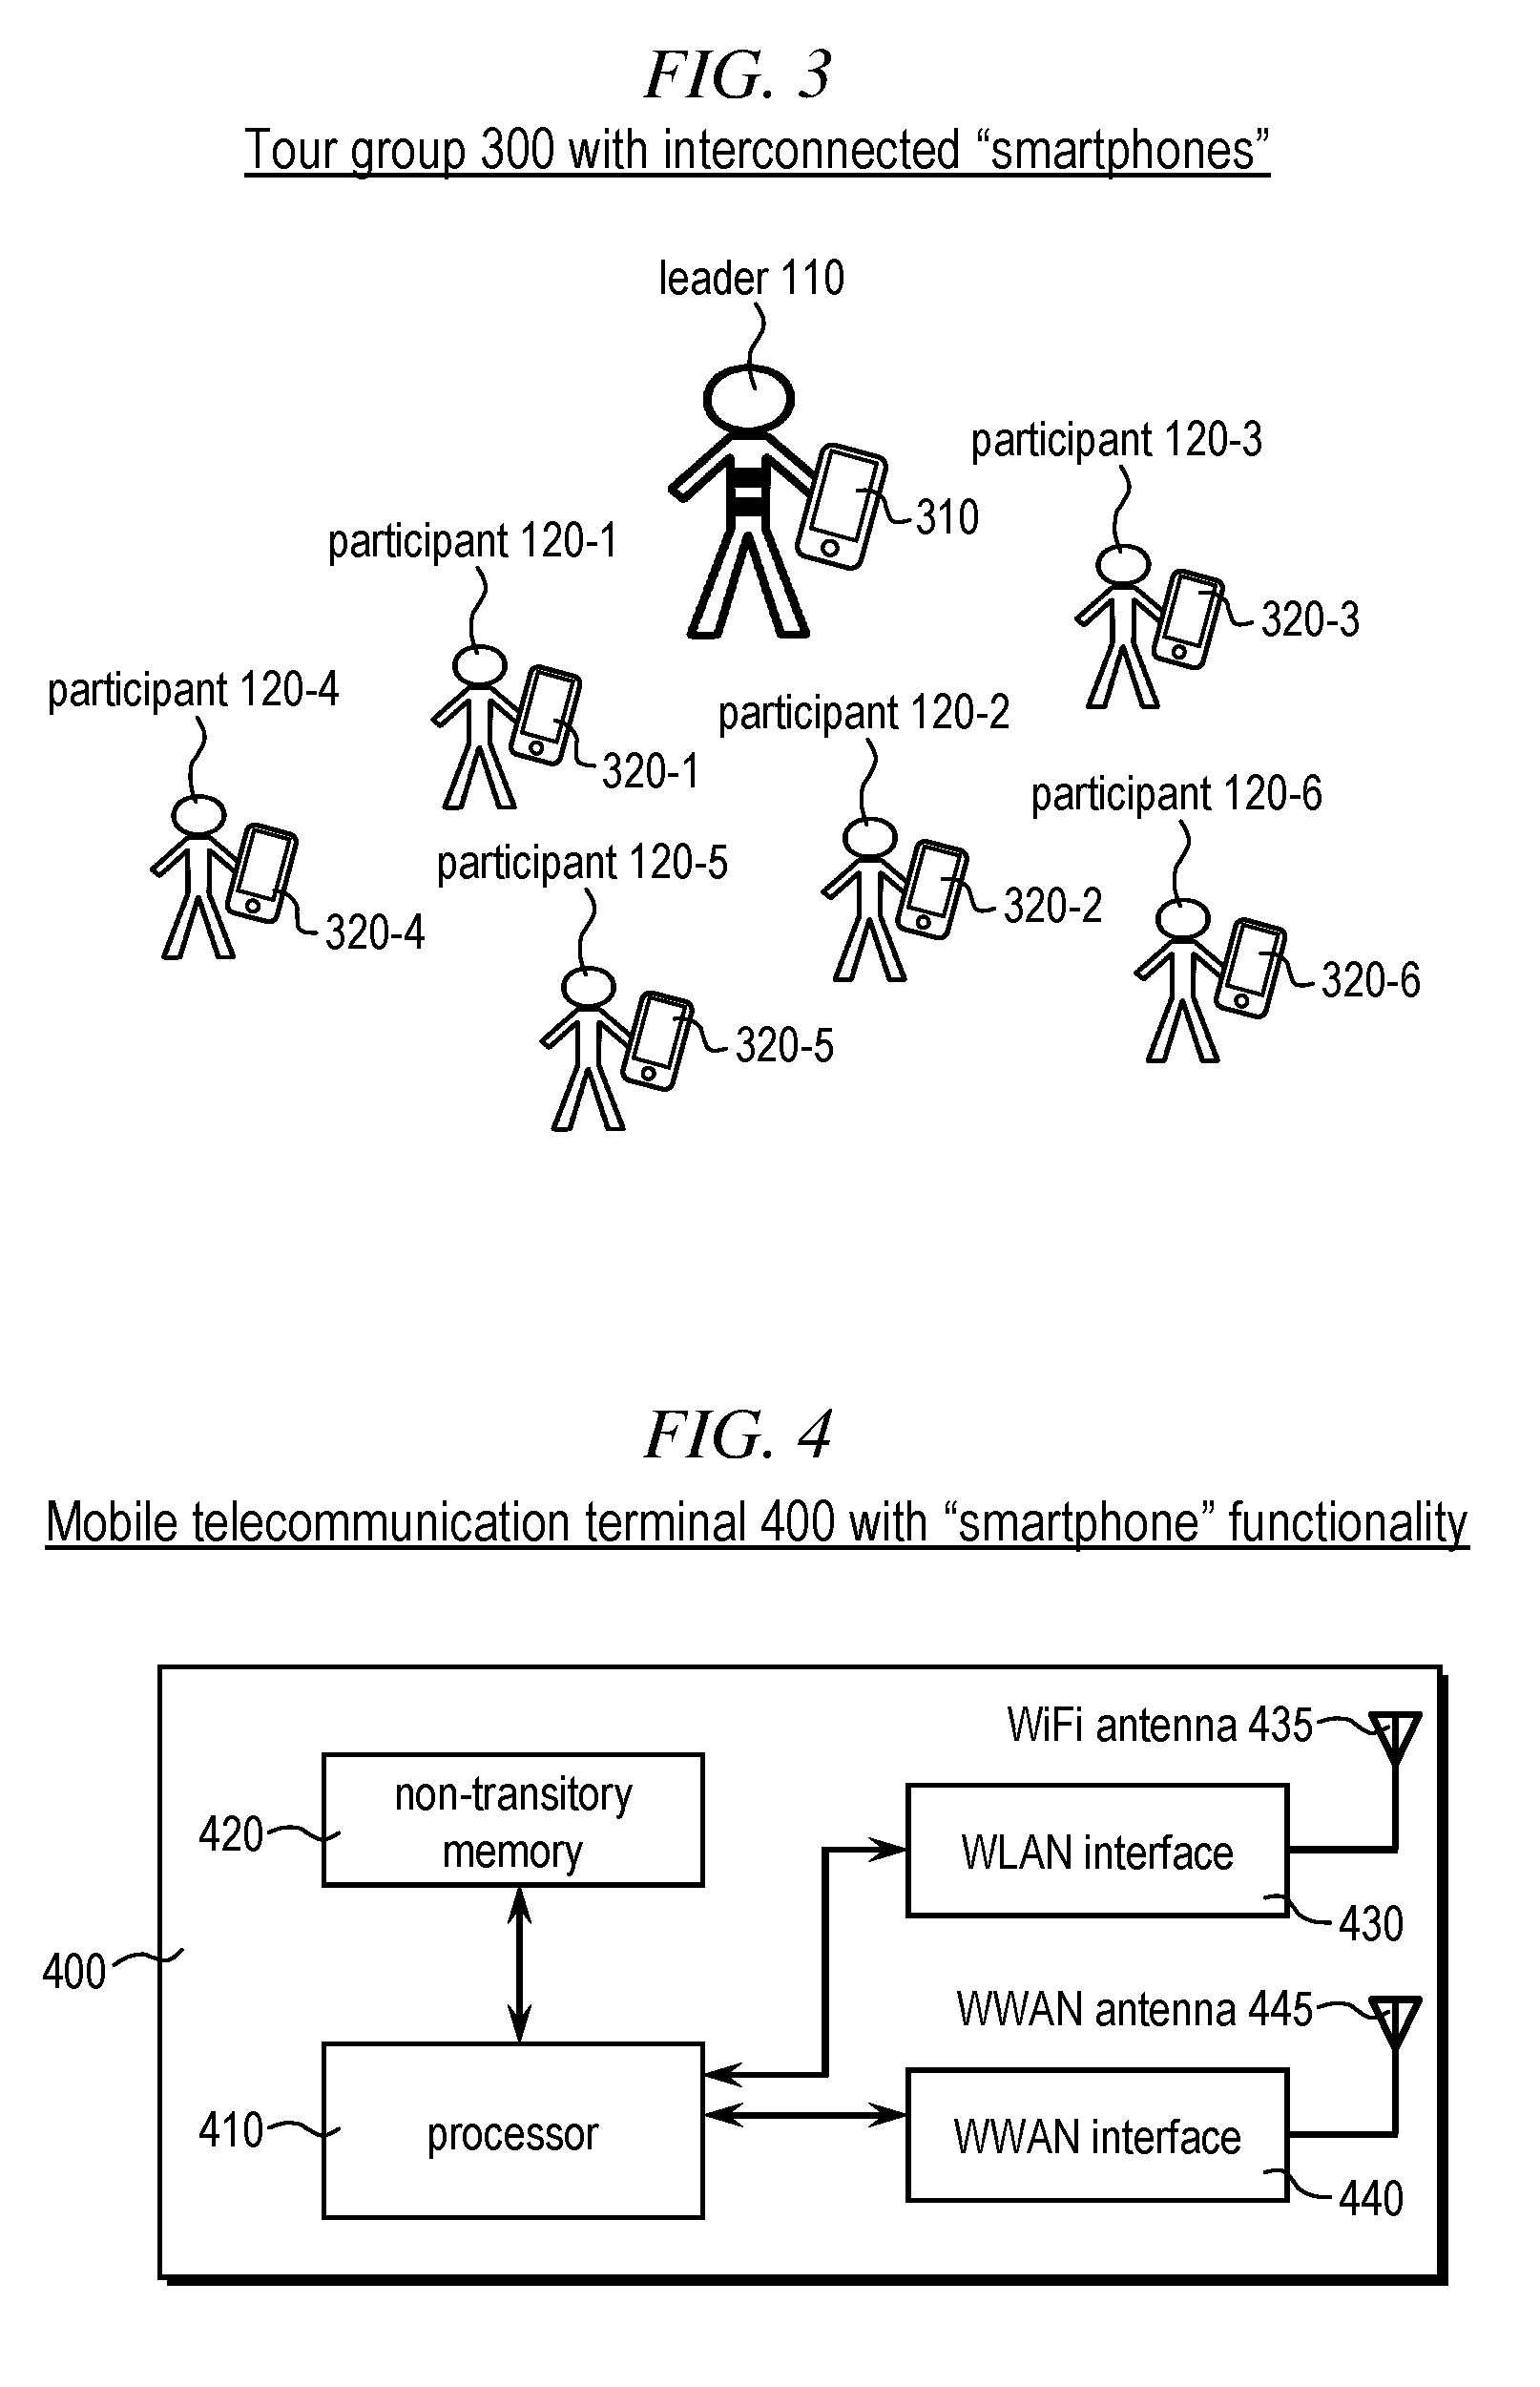 System for Maintaining the Integrity of a Tour Group